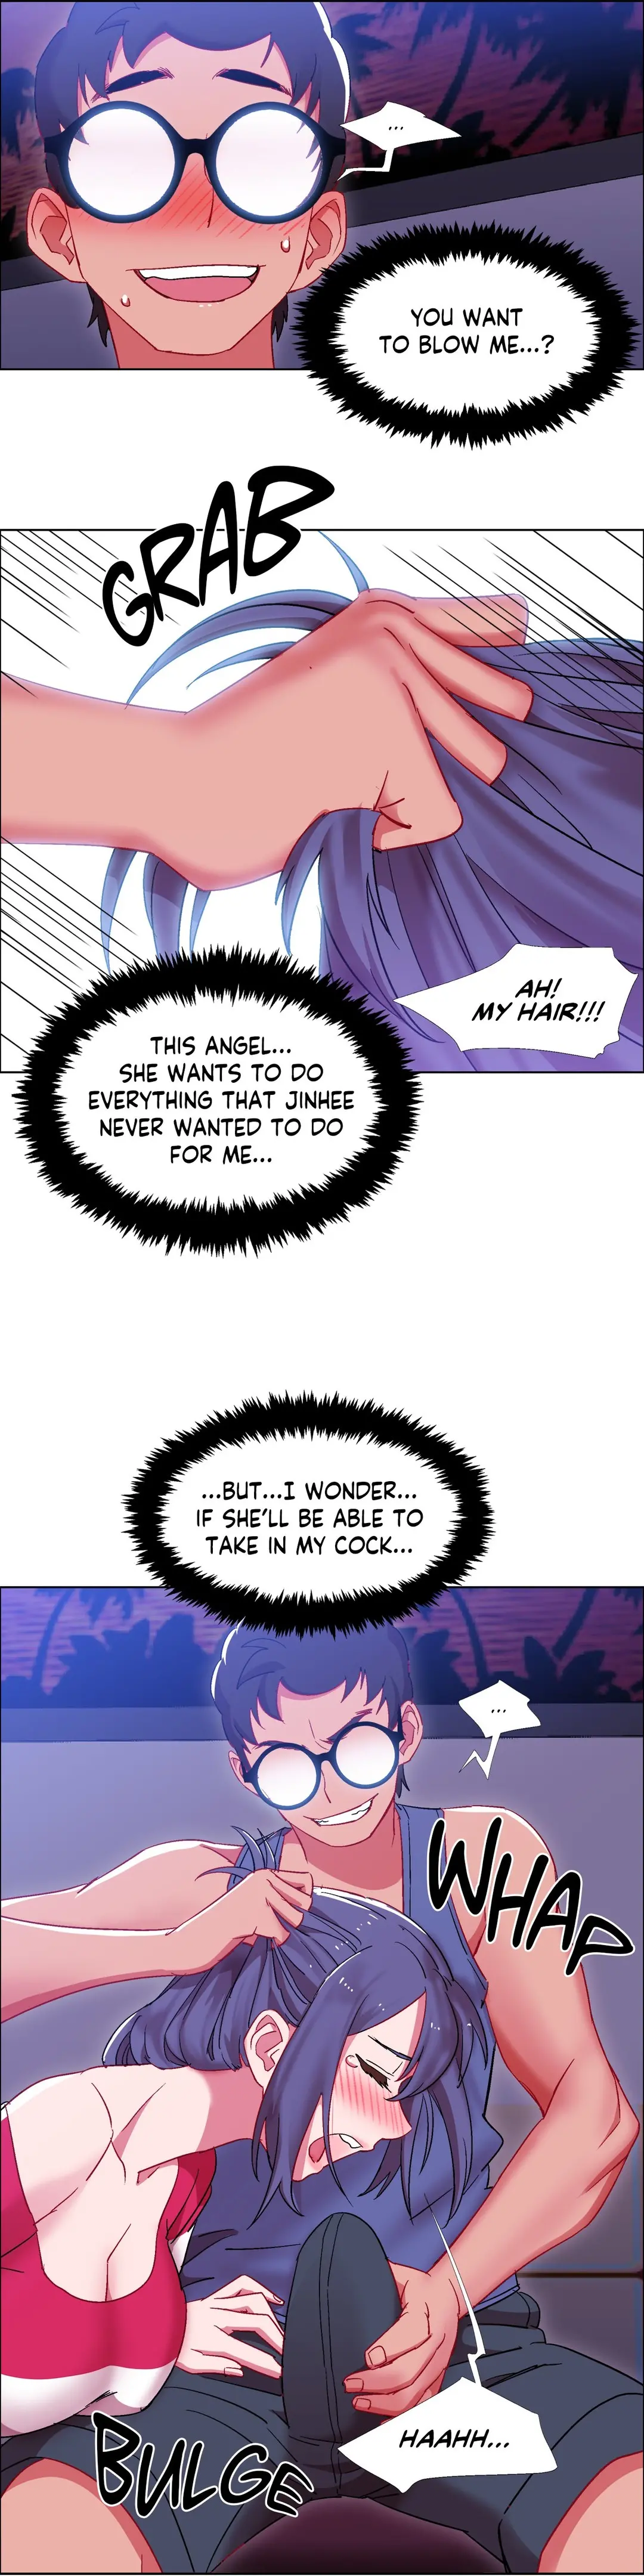 Rental Girls - Chapter 20 Page 2